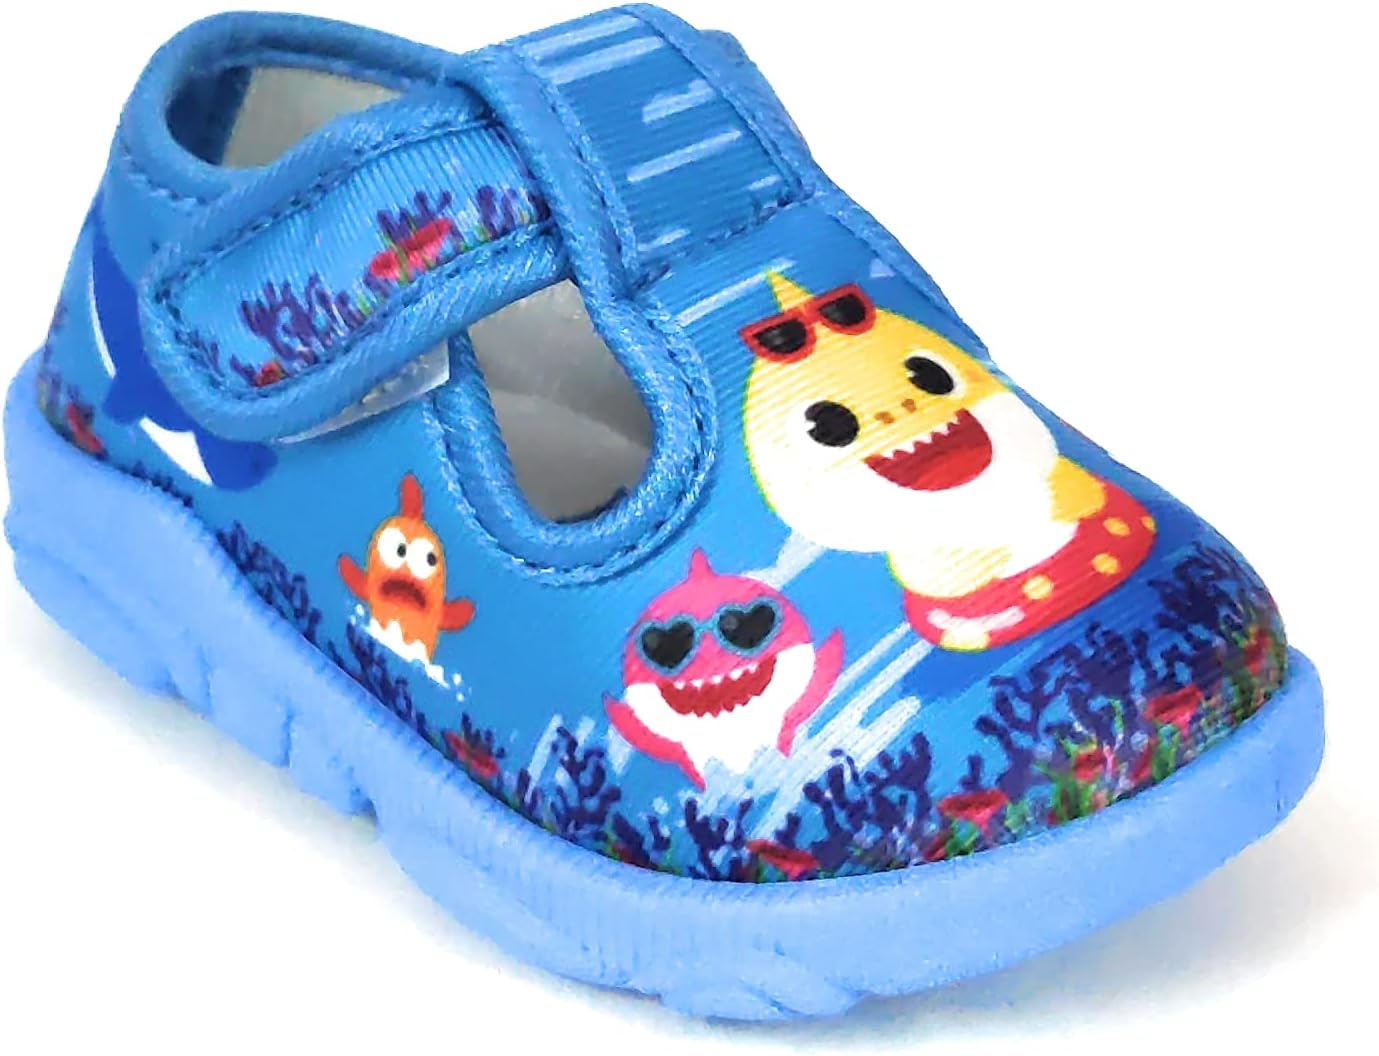 Coolz Kids Chu-Chu Sound Musical First Walking Shoes Star-7 for Baby Boys and Baby Girls for 9-24 Months